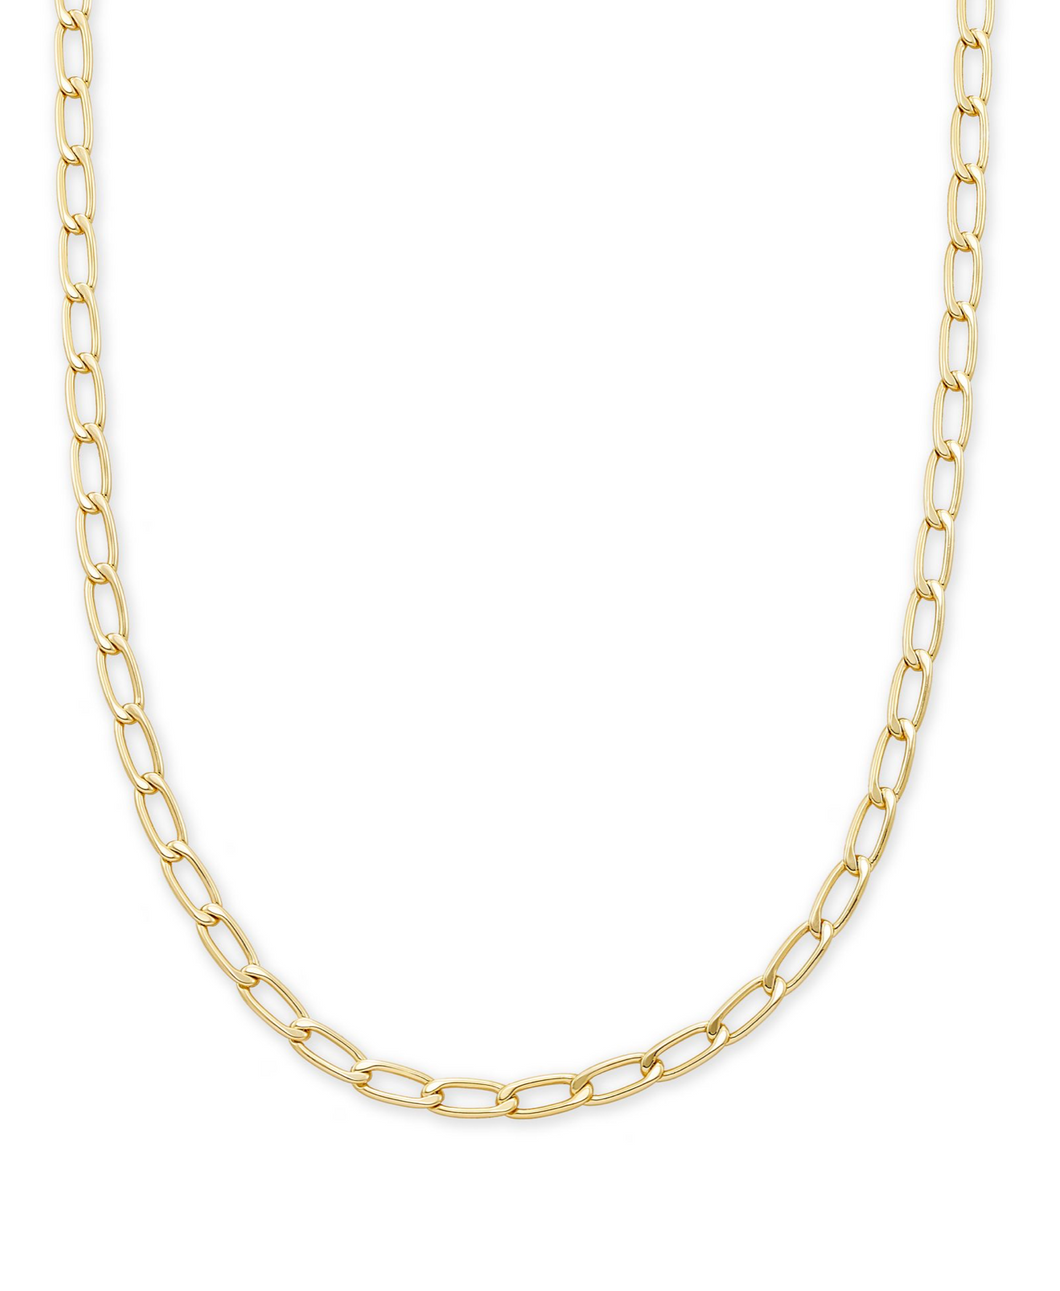 Merrick Chain Necklace in Gold by Kendra Scott